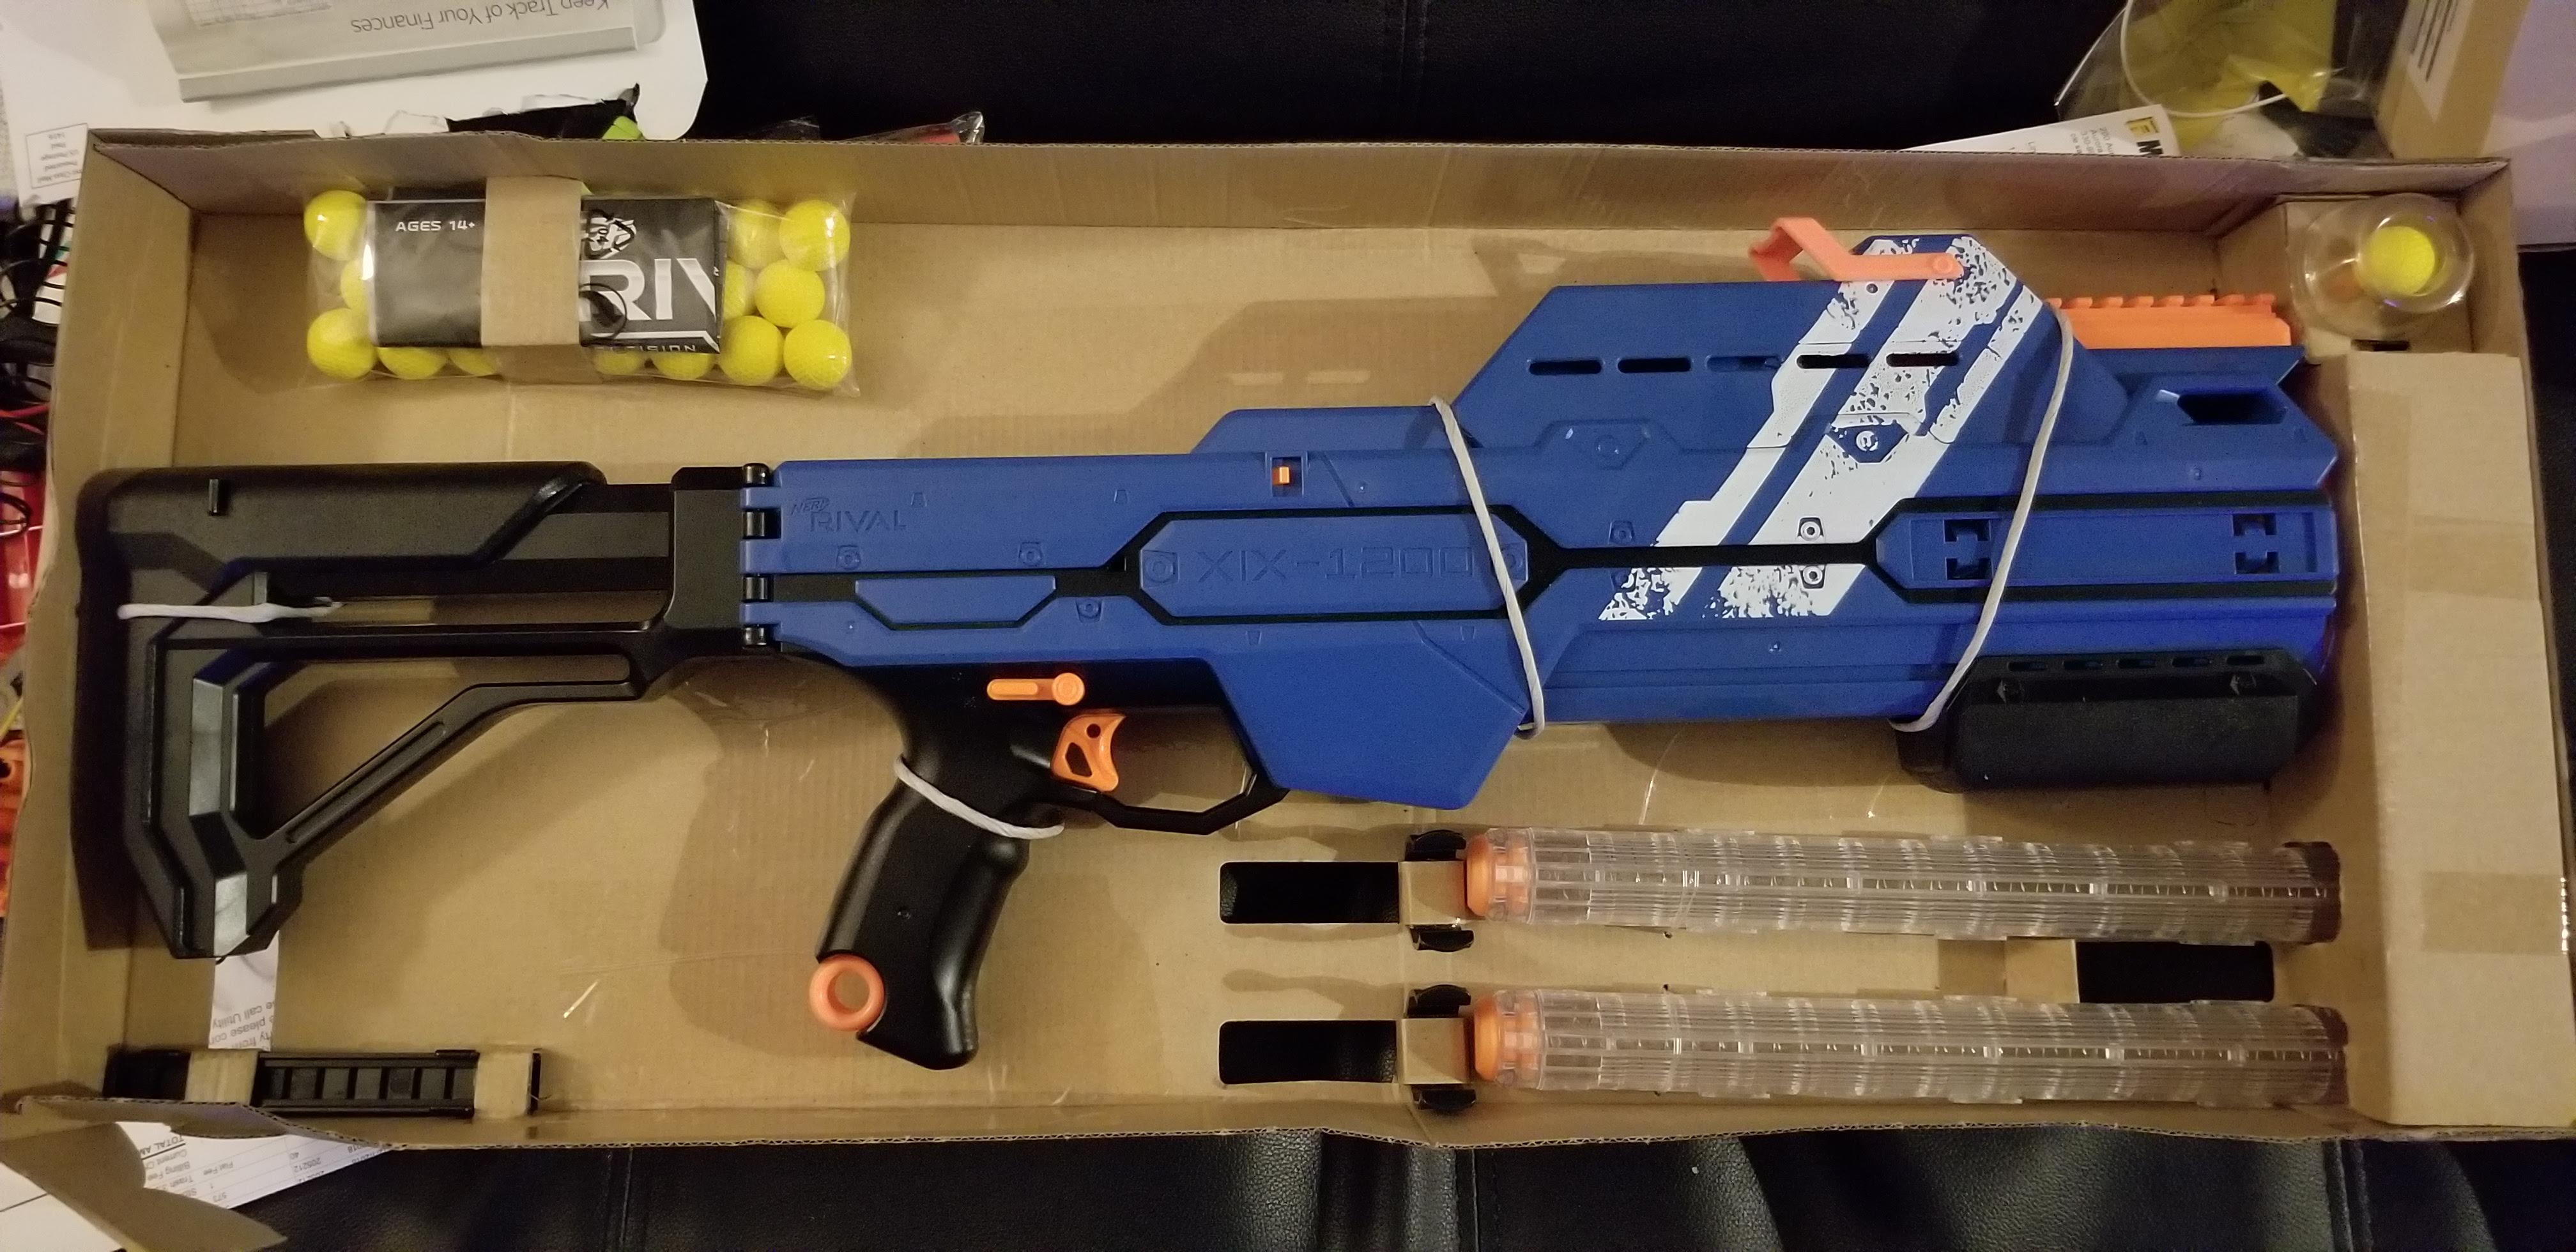 nerf rival hypnos release date